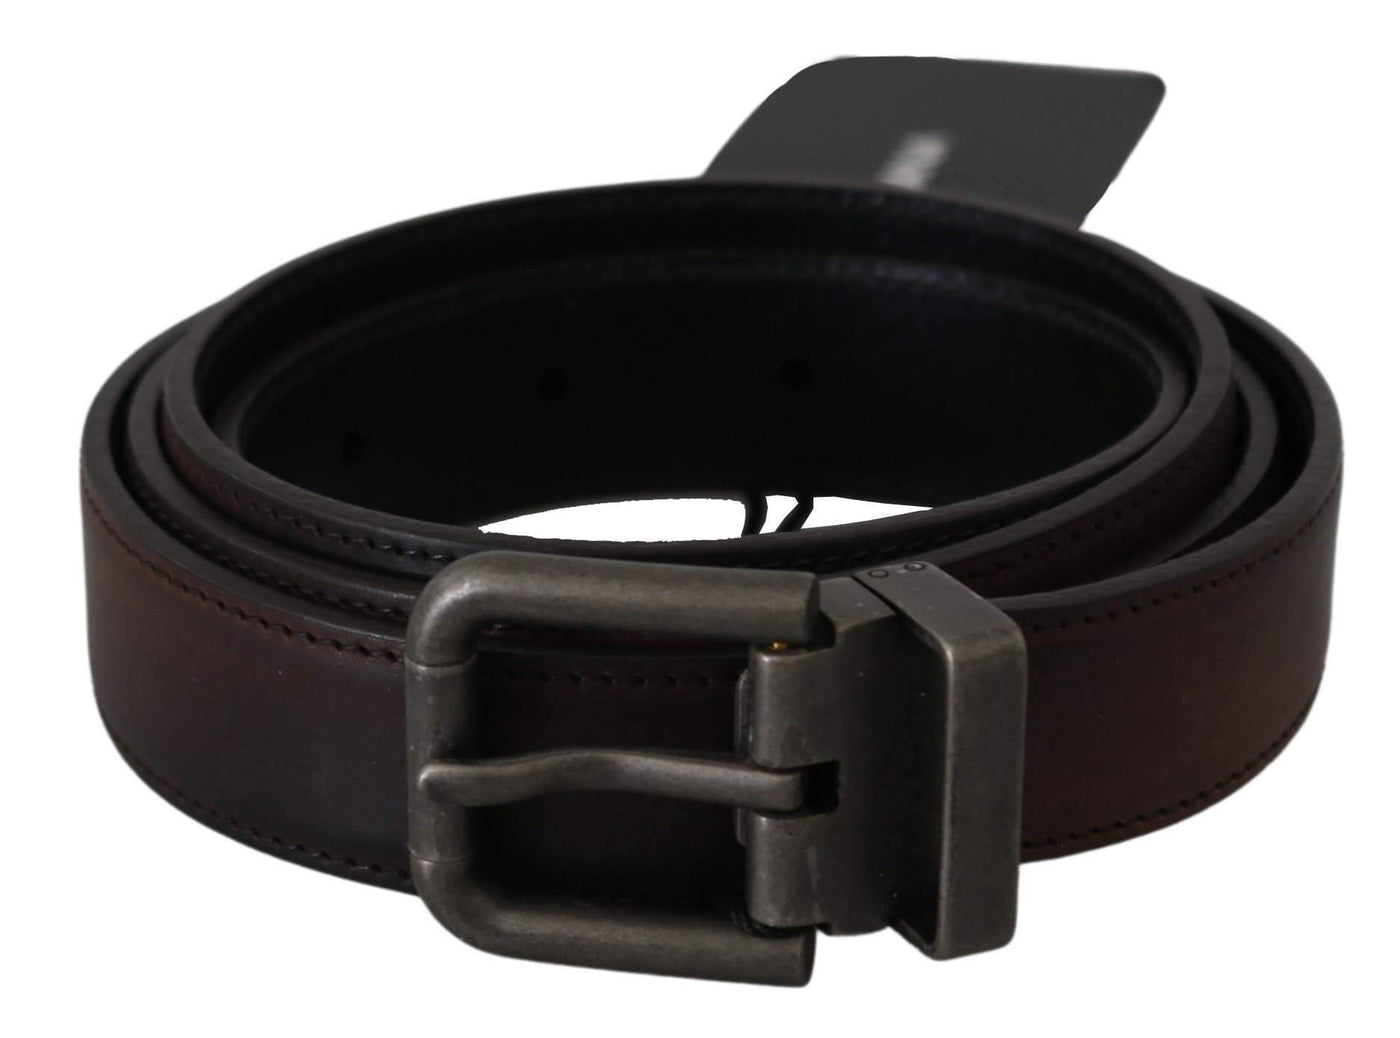 Dolce & Gabbana Solid Brown Leather Gray Buckle Belt #men, 115 cm / 46 Inches, 85 cm / 34 Inches, Accessories - New Arrivals, Belts - Men - Accessories, Brand_Dolce & Gabbana, Brown, Dolce & Gabbana, feed-agegroup-adult, feed-color-brown, feed-gender-male, feed-size- 34 Inches, feed-size- 40 Inches, feed-size- 46 Inches, Gender_Men at SEYMAYKA